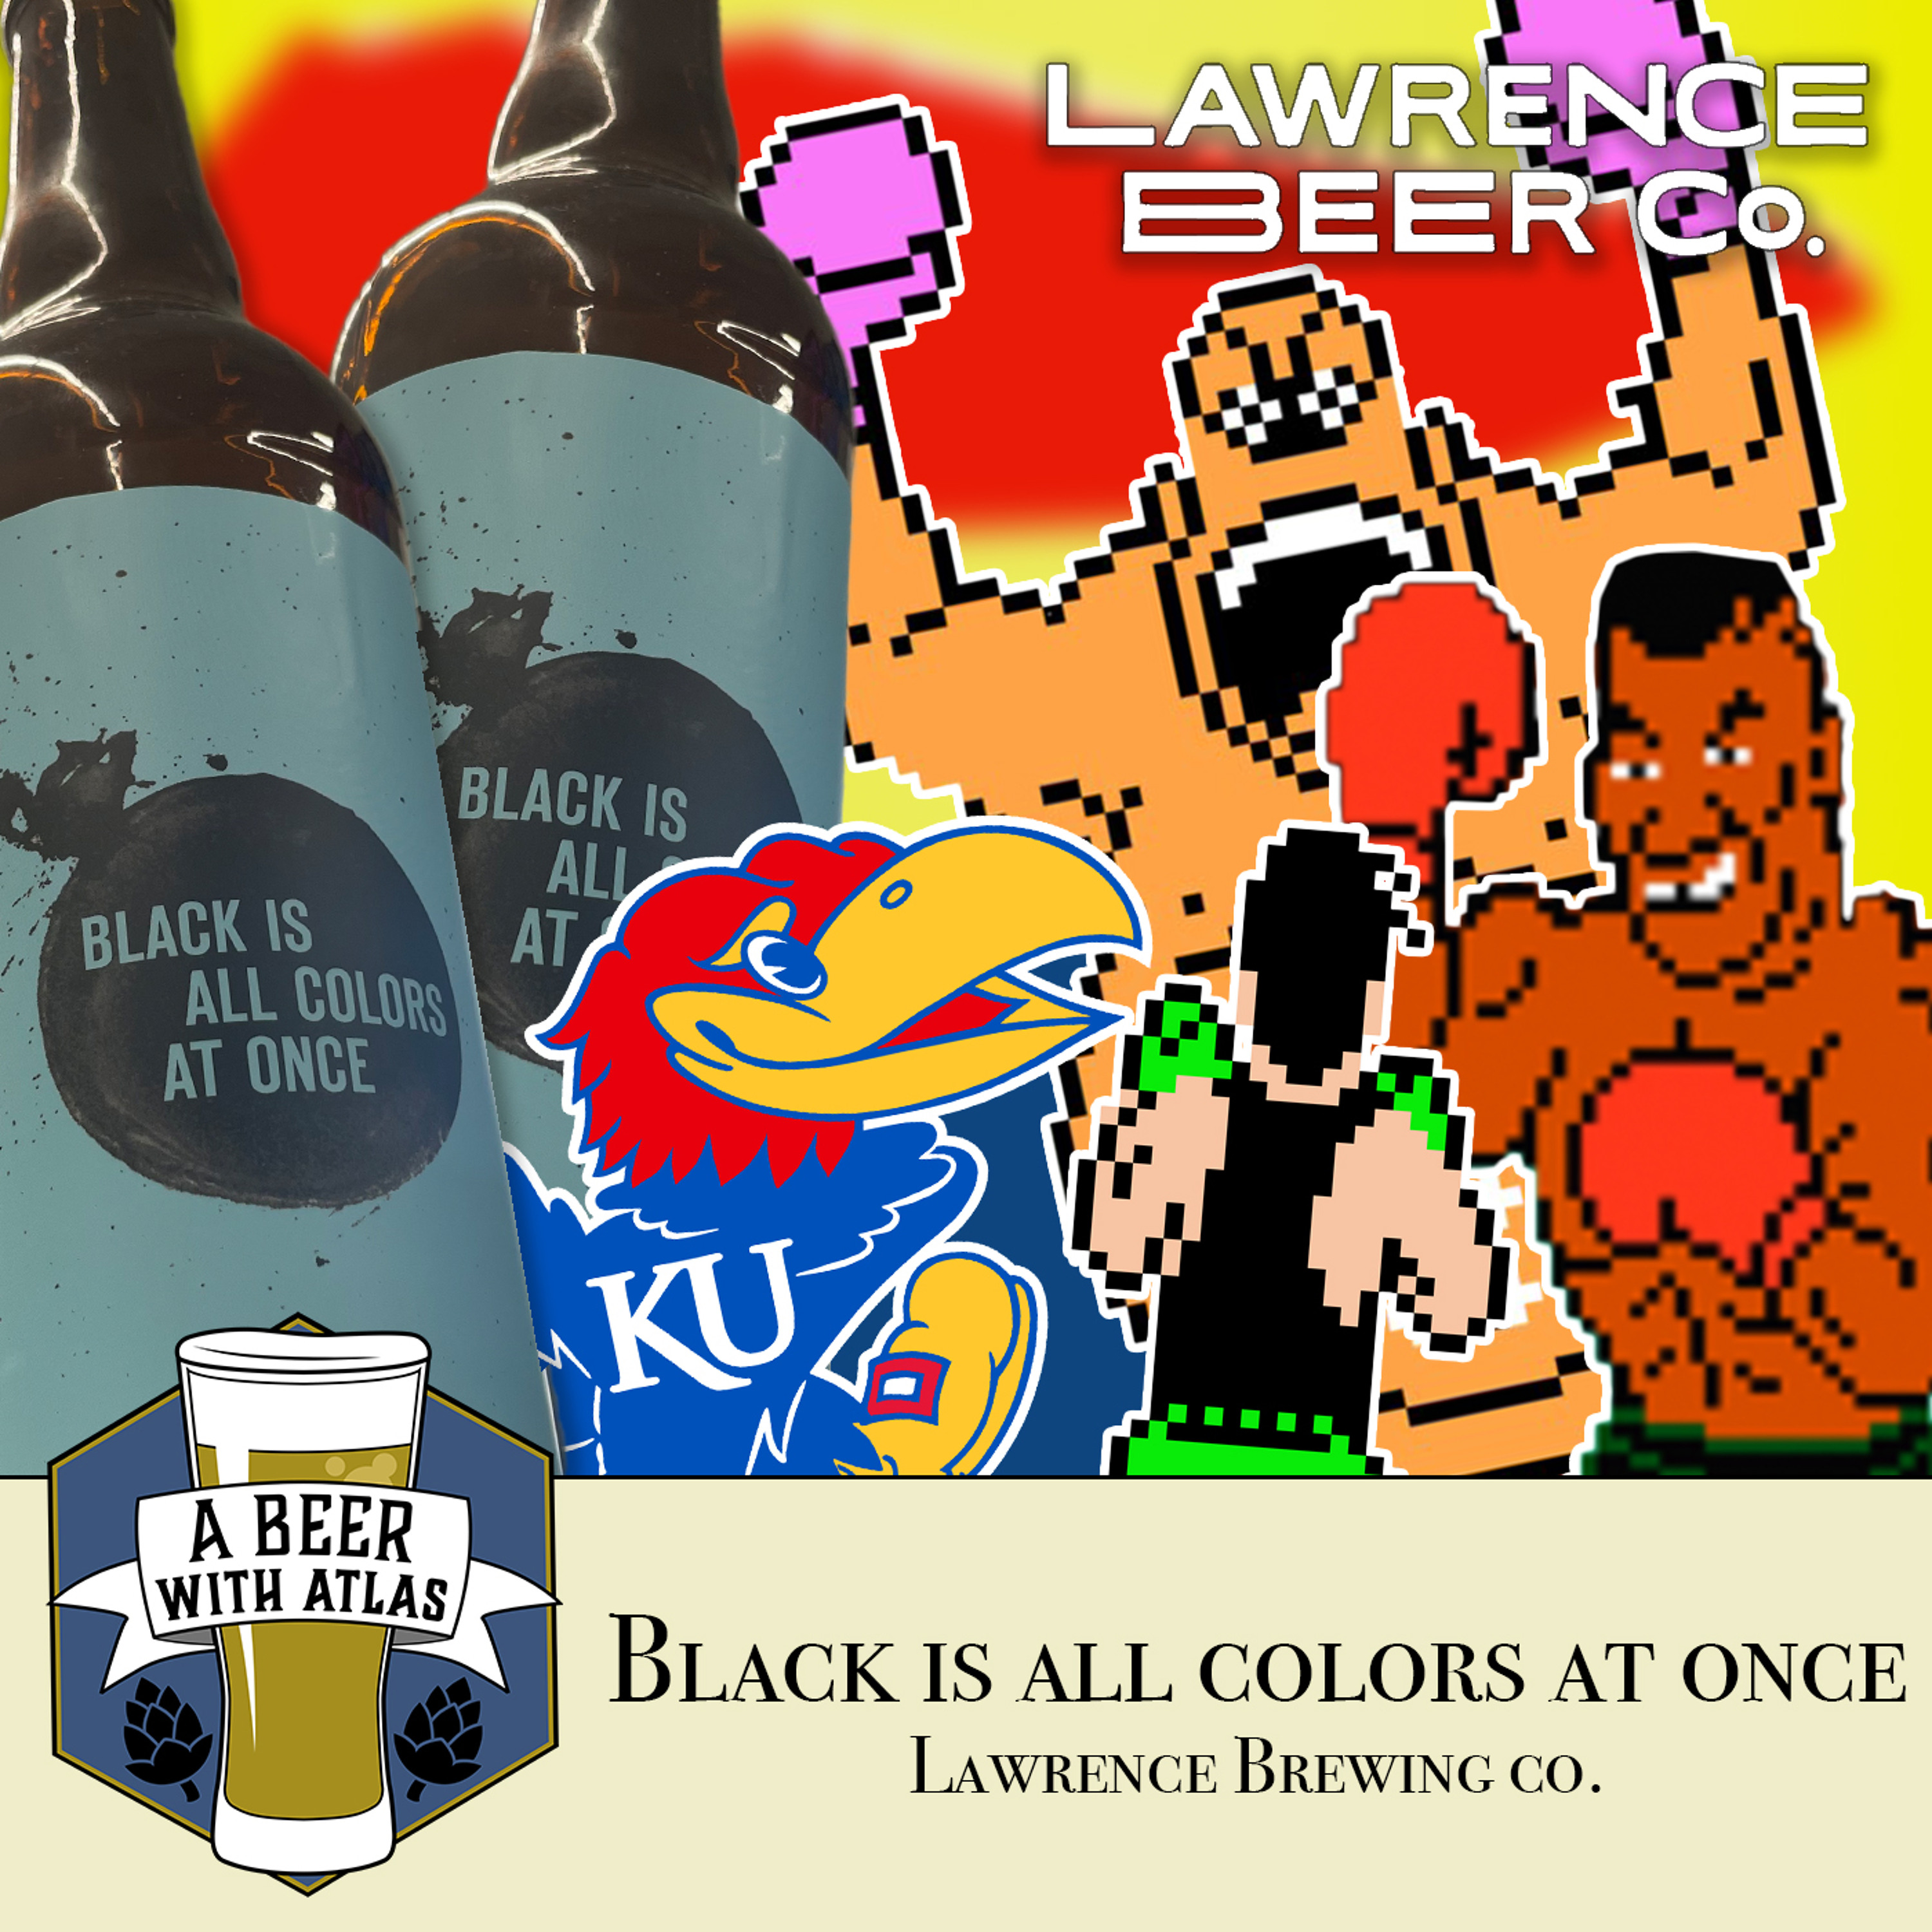 Black is All Colors At Once by Lawrence Brewing Co. - A Beer with Atlas 187